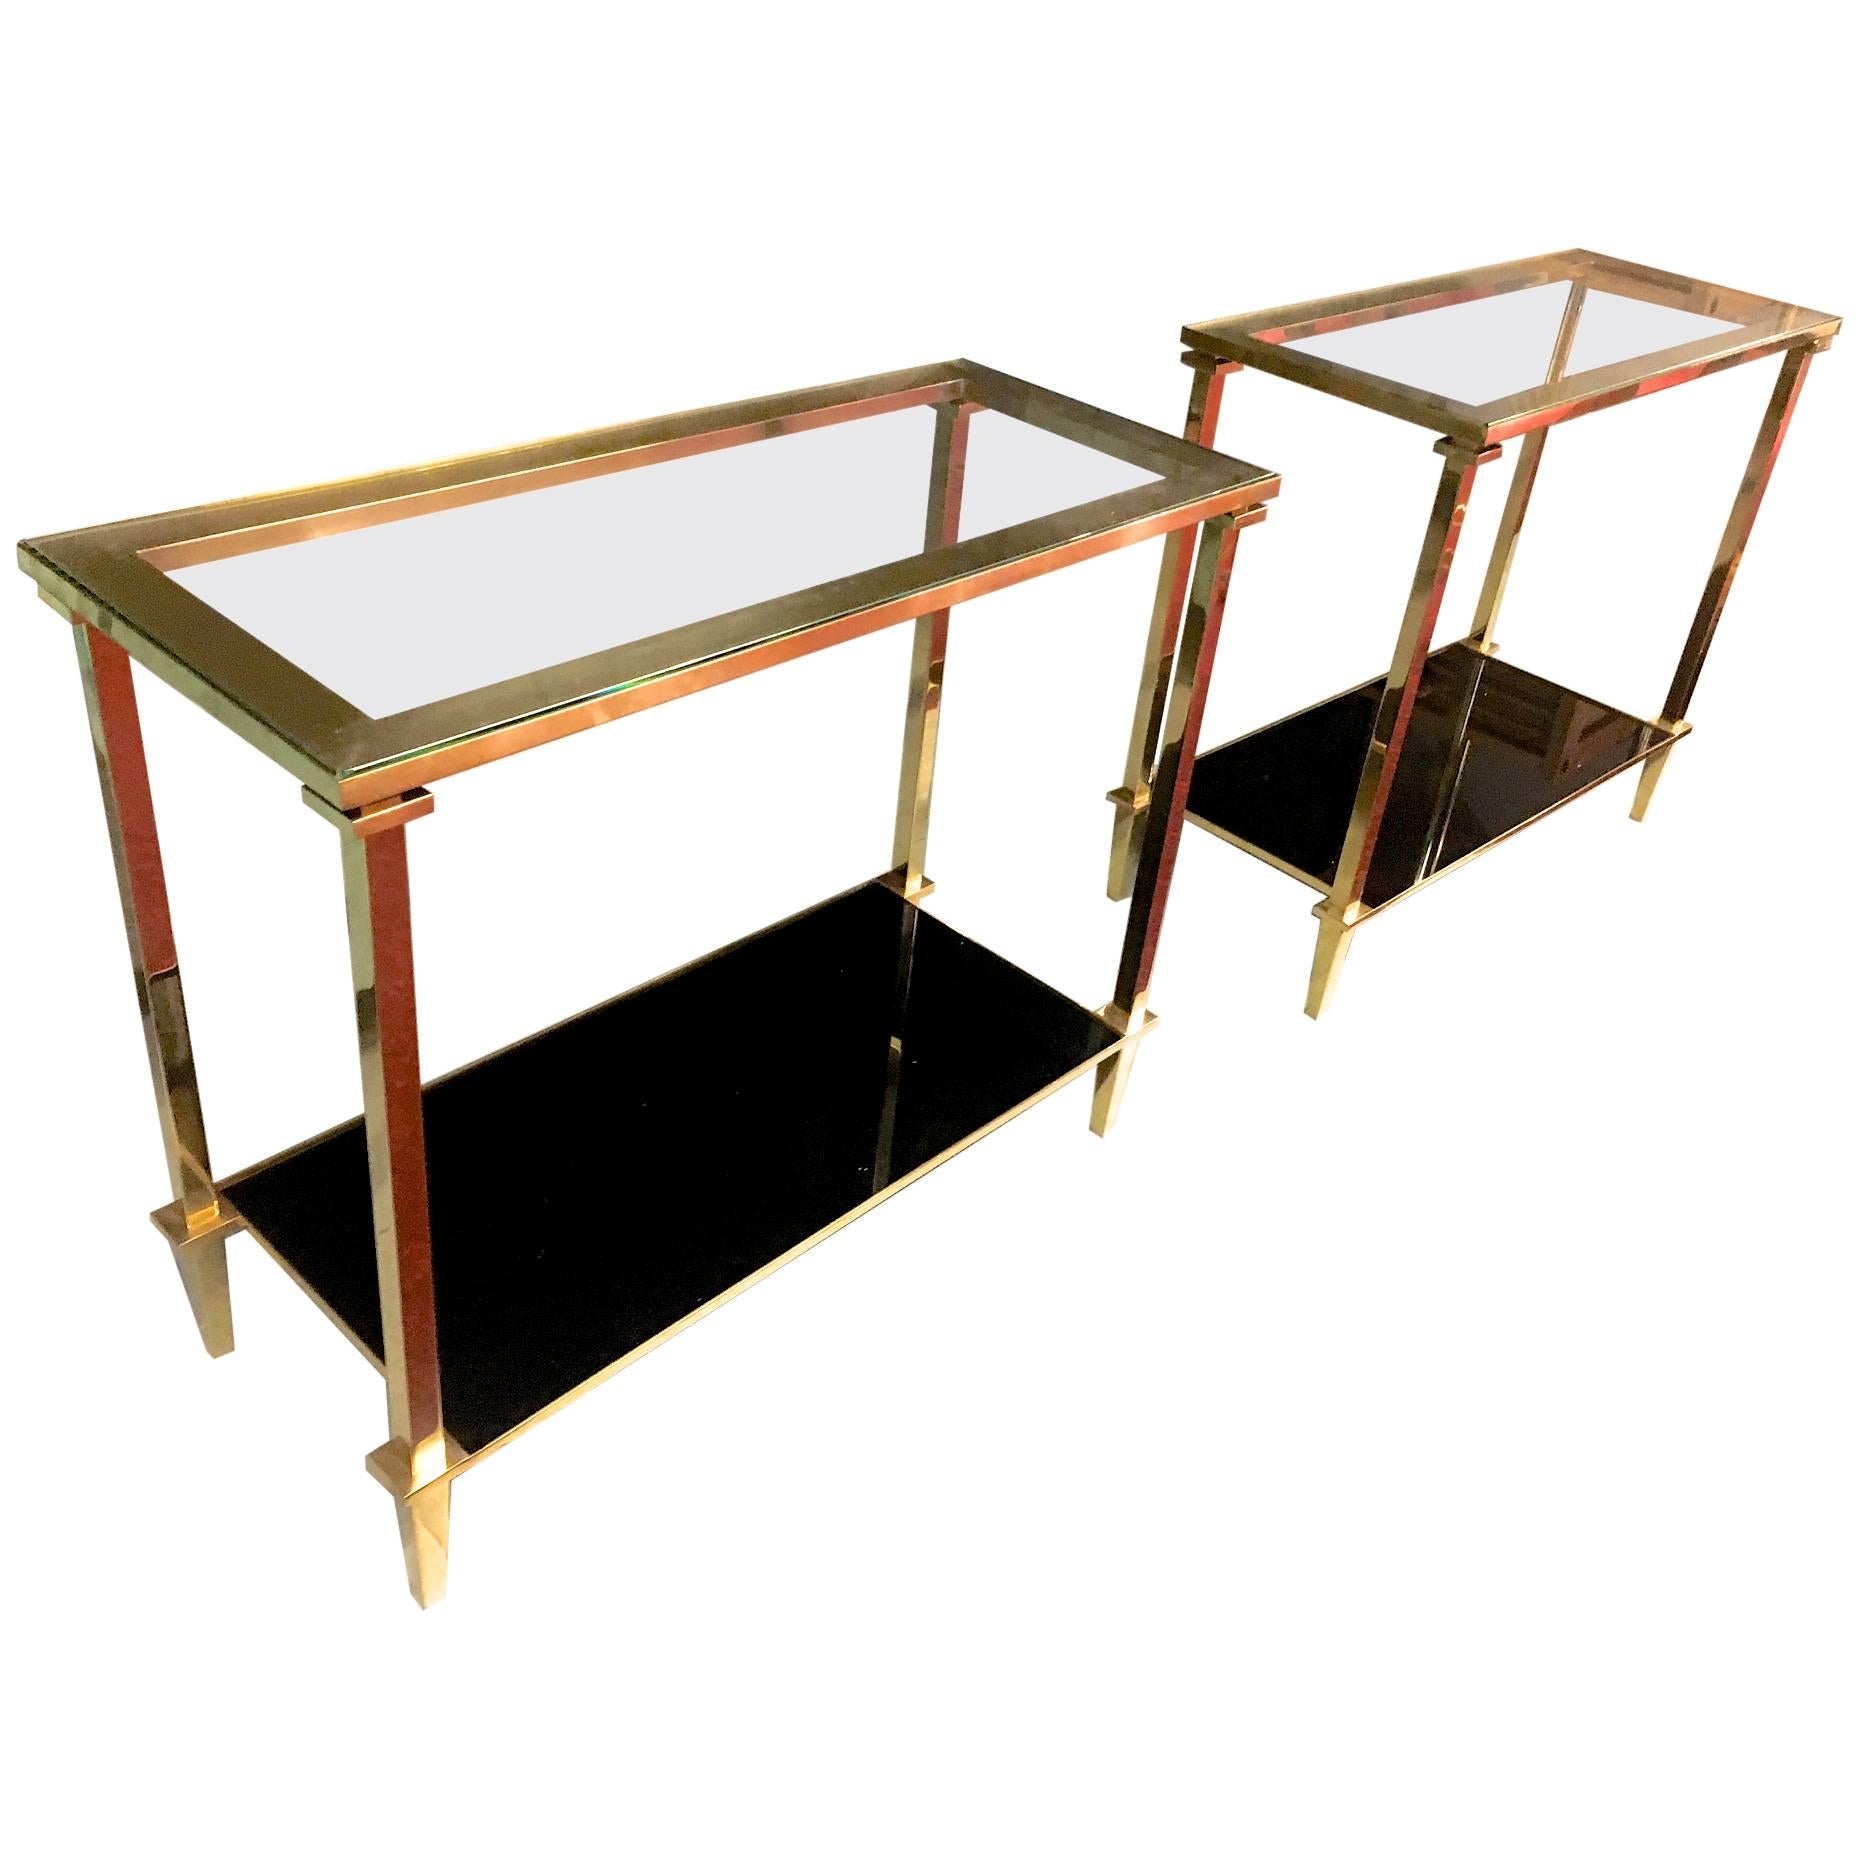 Refined Pair of Two Tiers Side Tables with Bronze Pure Hardware For Sale